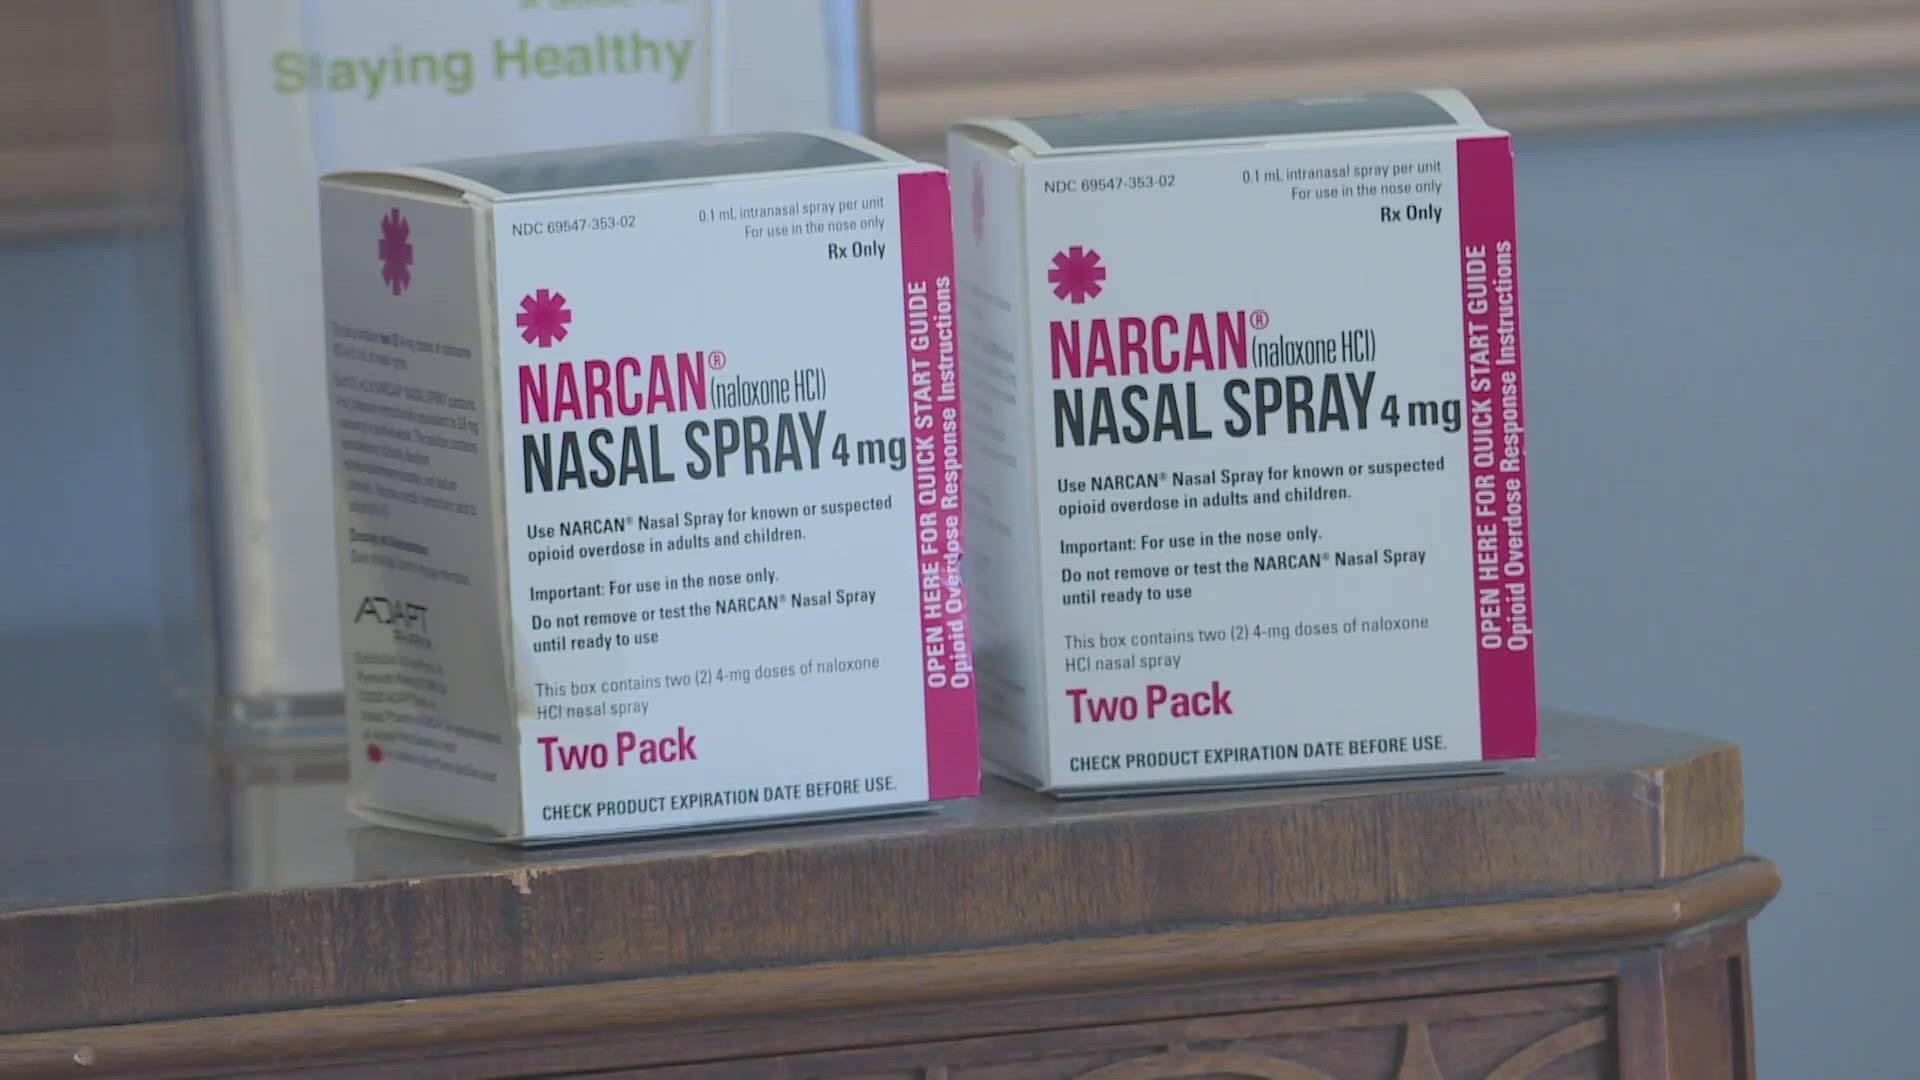 The announcement comes months after the nasal spray was approved for over-the-counter use by the U.S. Food and Drug Administration.